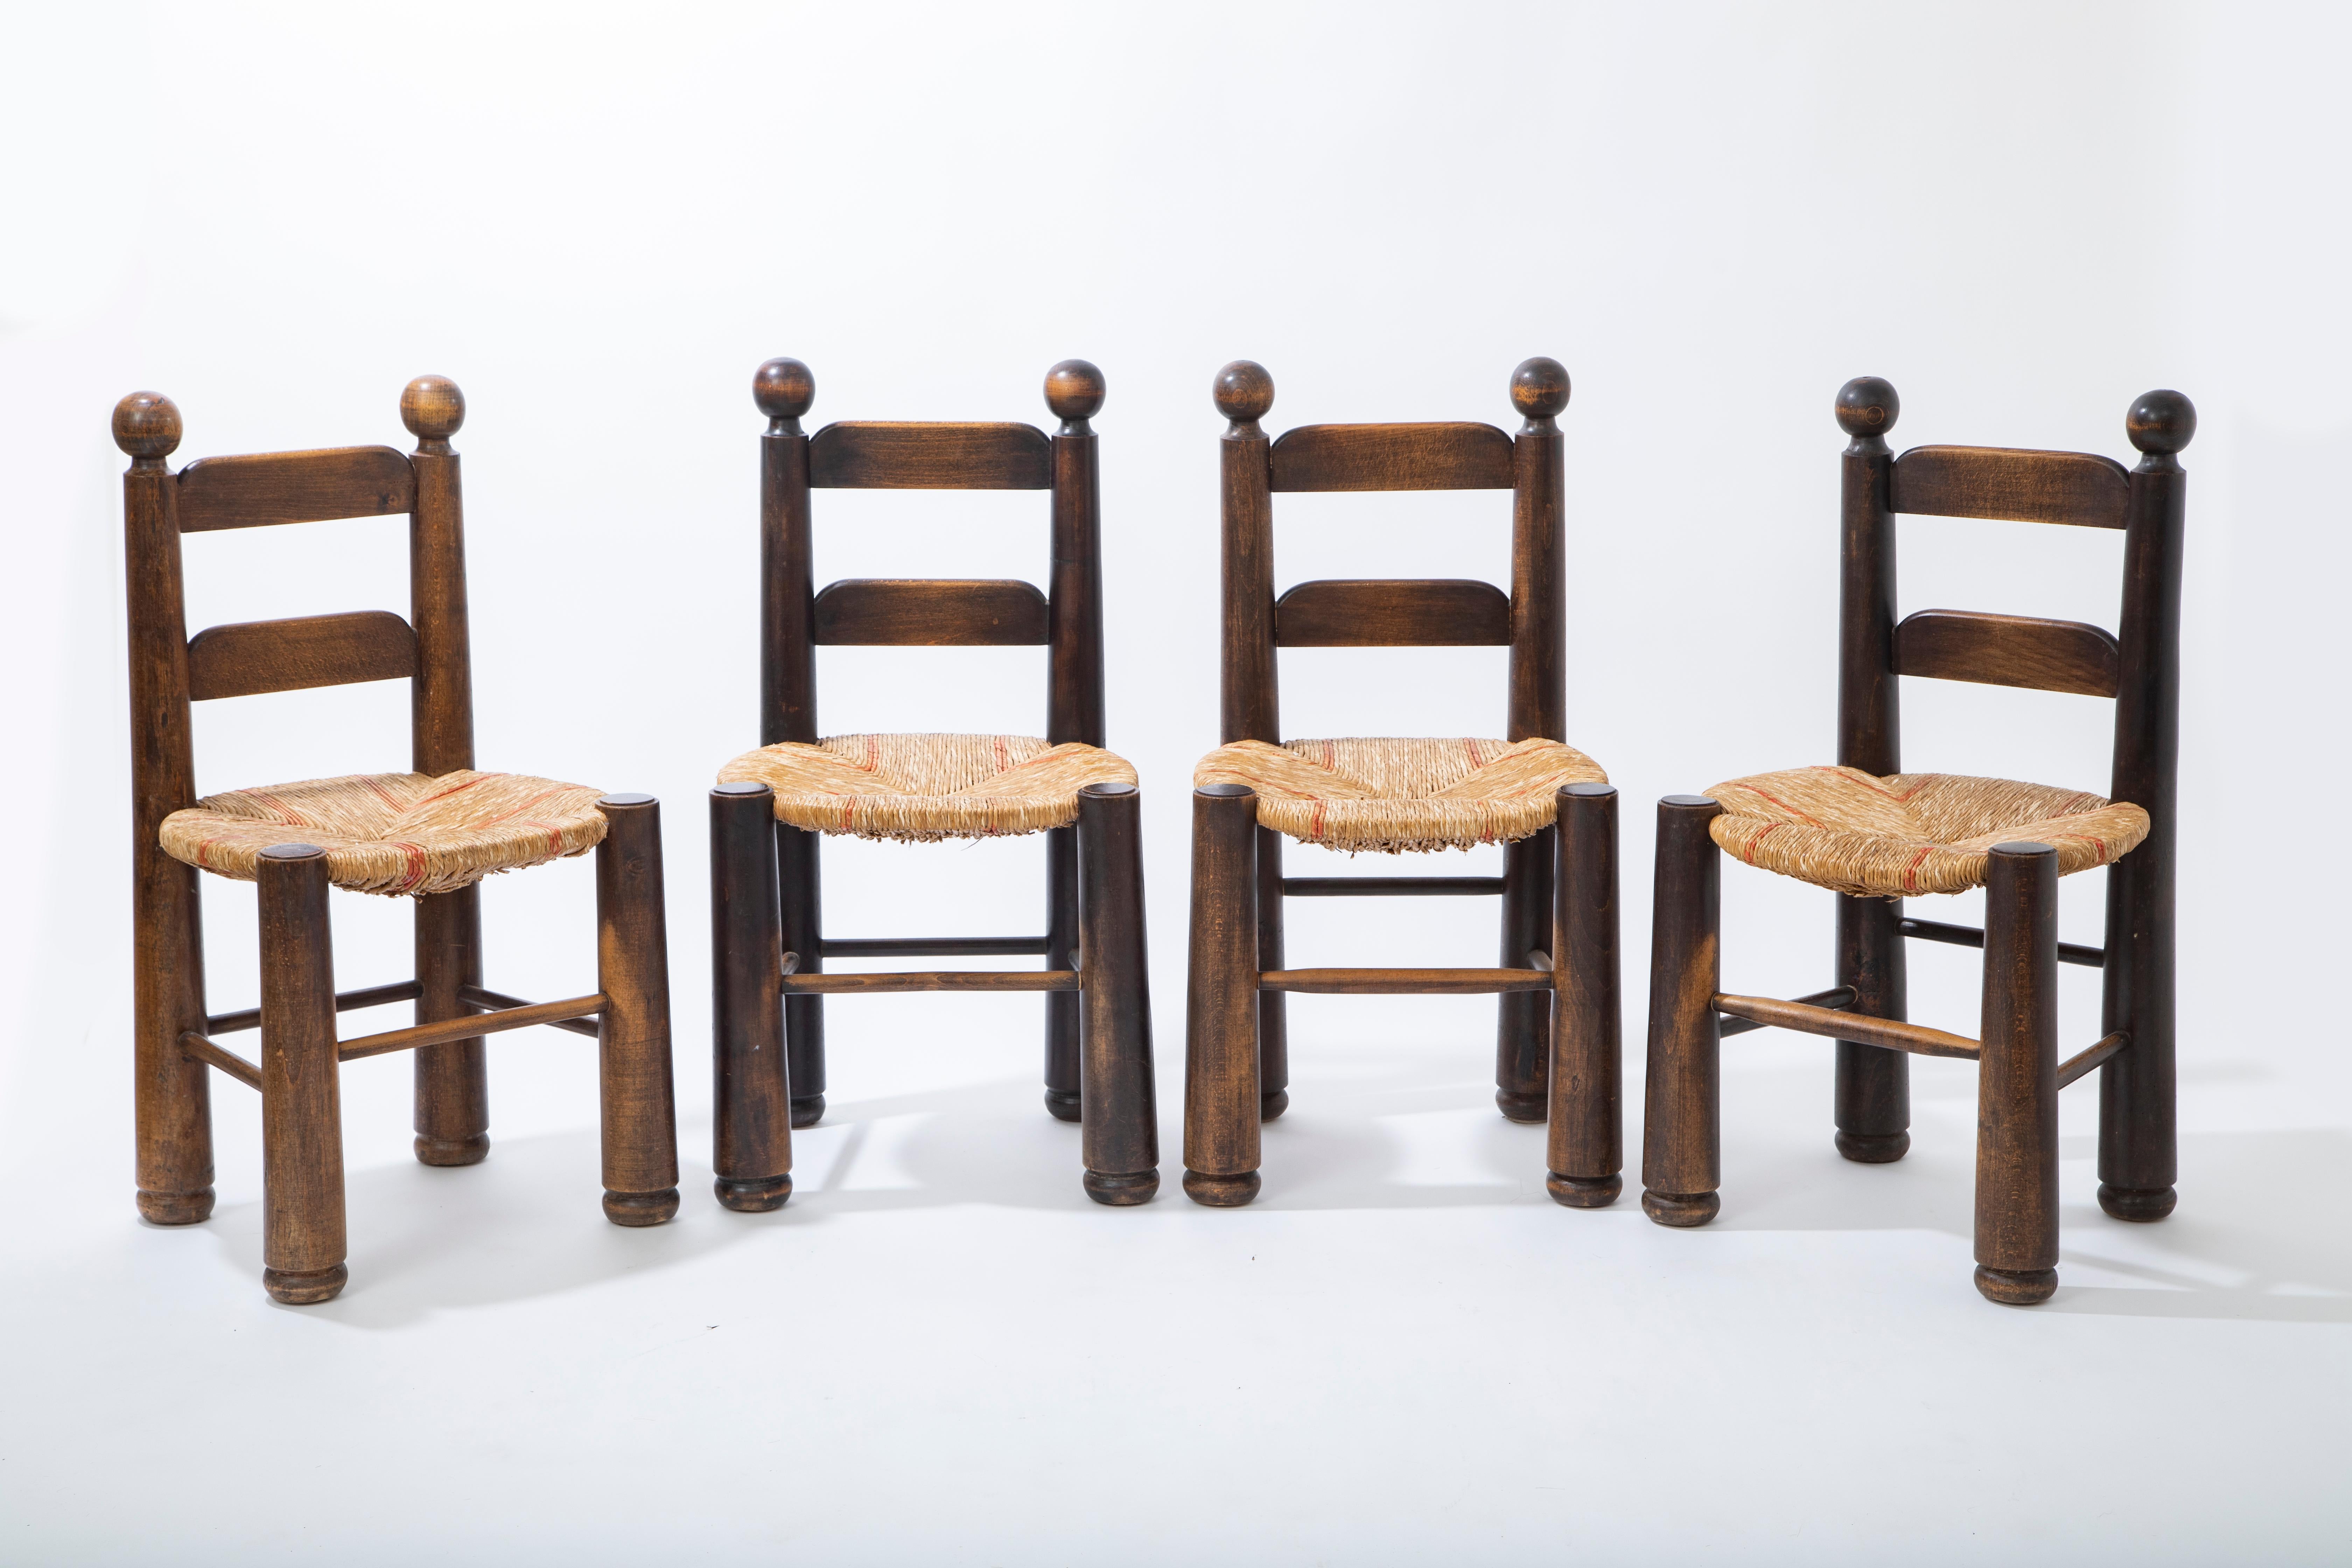 Set of four oak dining chairs with rush seats by Charles Dudouyt
 Ladder-back carved oak wood 
Featuring woven rush seats with some red accents 
Original condition and patina
 Structurally sound for everyday use.
France circa